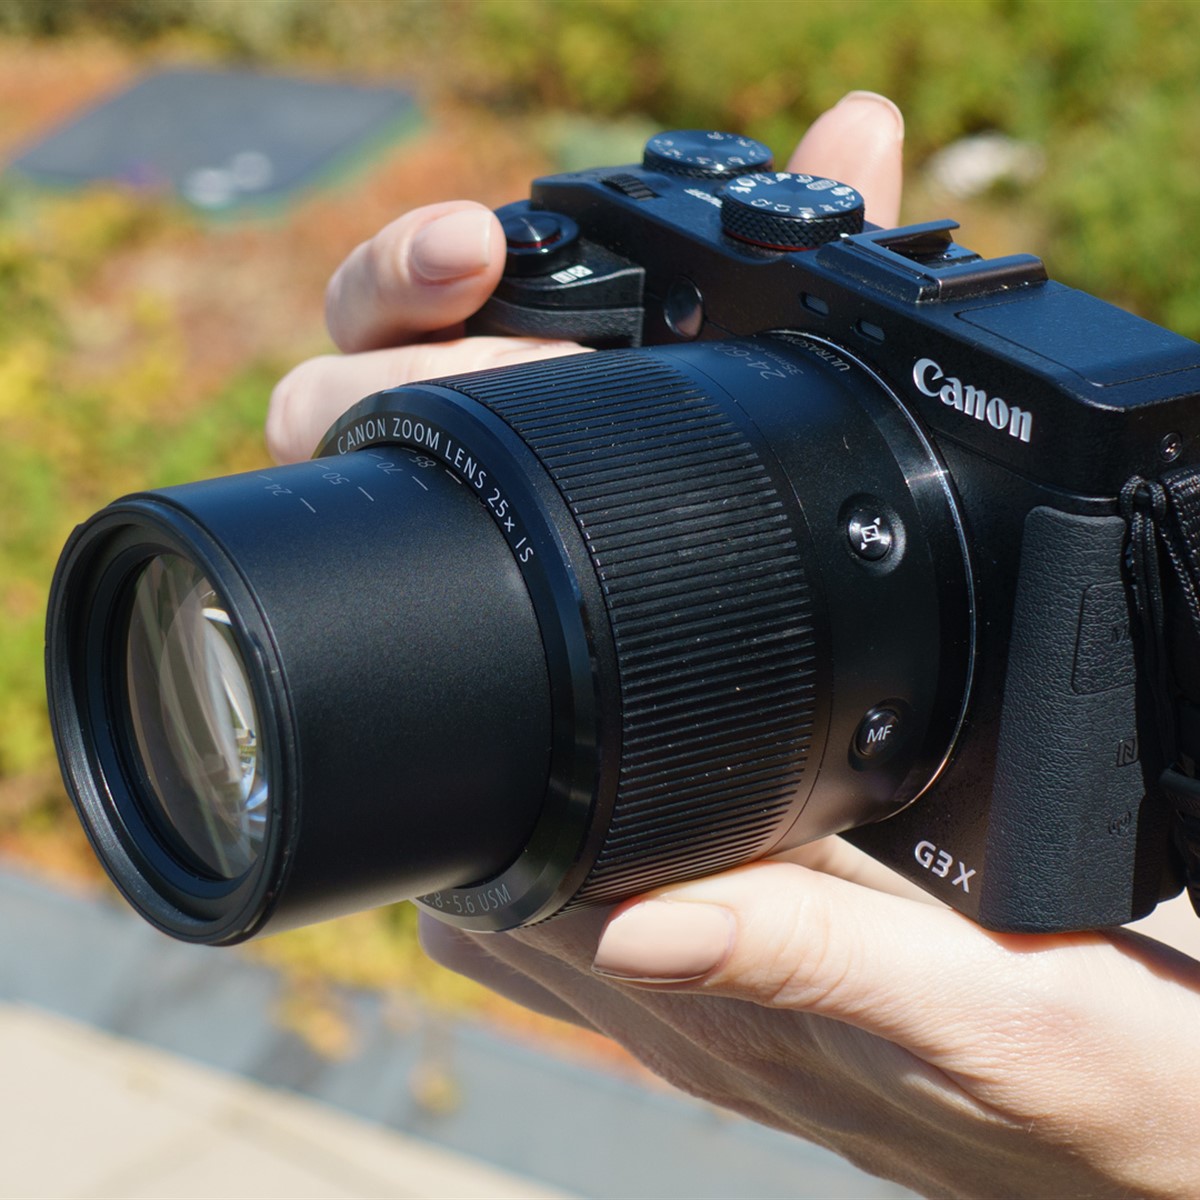 Canon PowerShot G3 X: A Compact Camera with a 1-inch Sensor